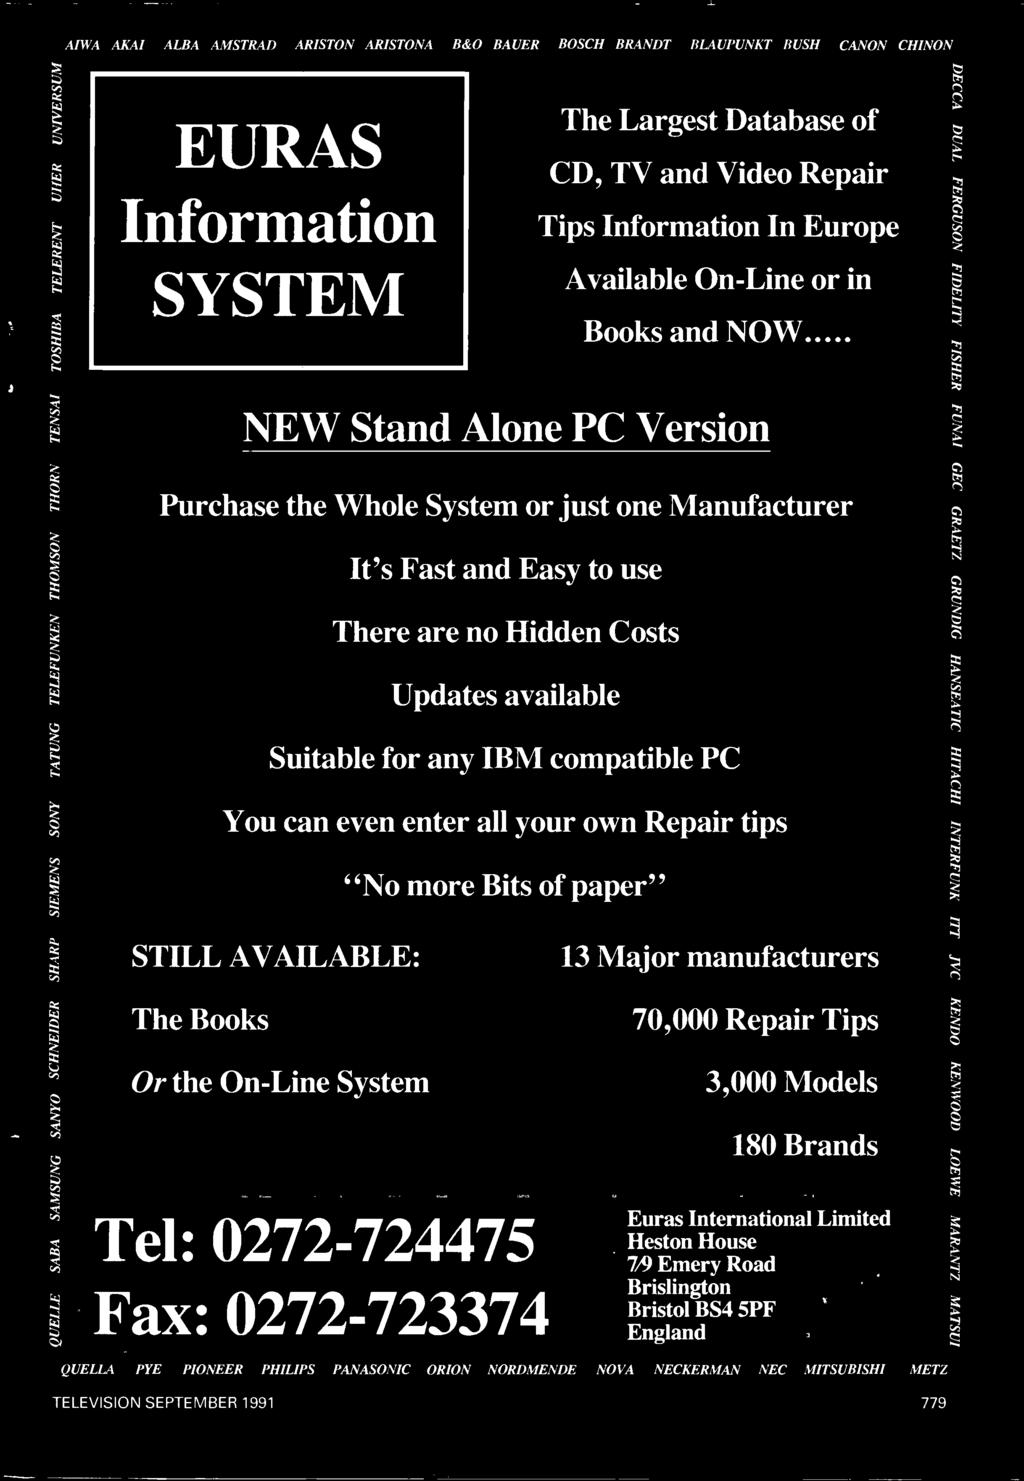 any IBM compatible PC You can even enter all your own Repair tips "No more Bits of paper" STILL AVAILABLE: The Books Or the On -Line System 13 Major manufacturers 70,000 Repair Tips 3,000 Models 180